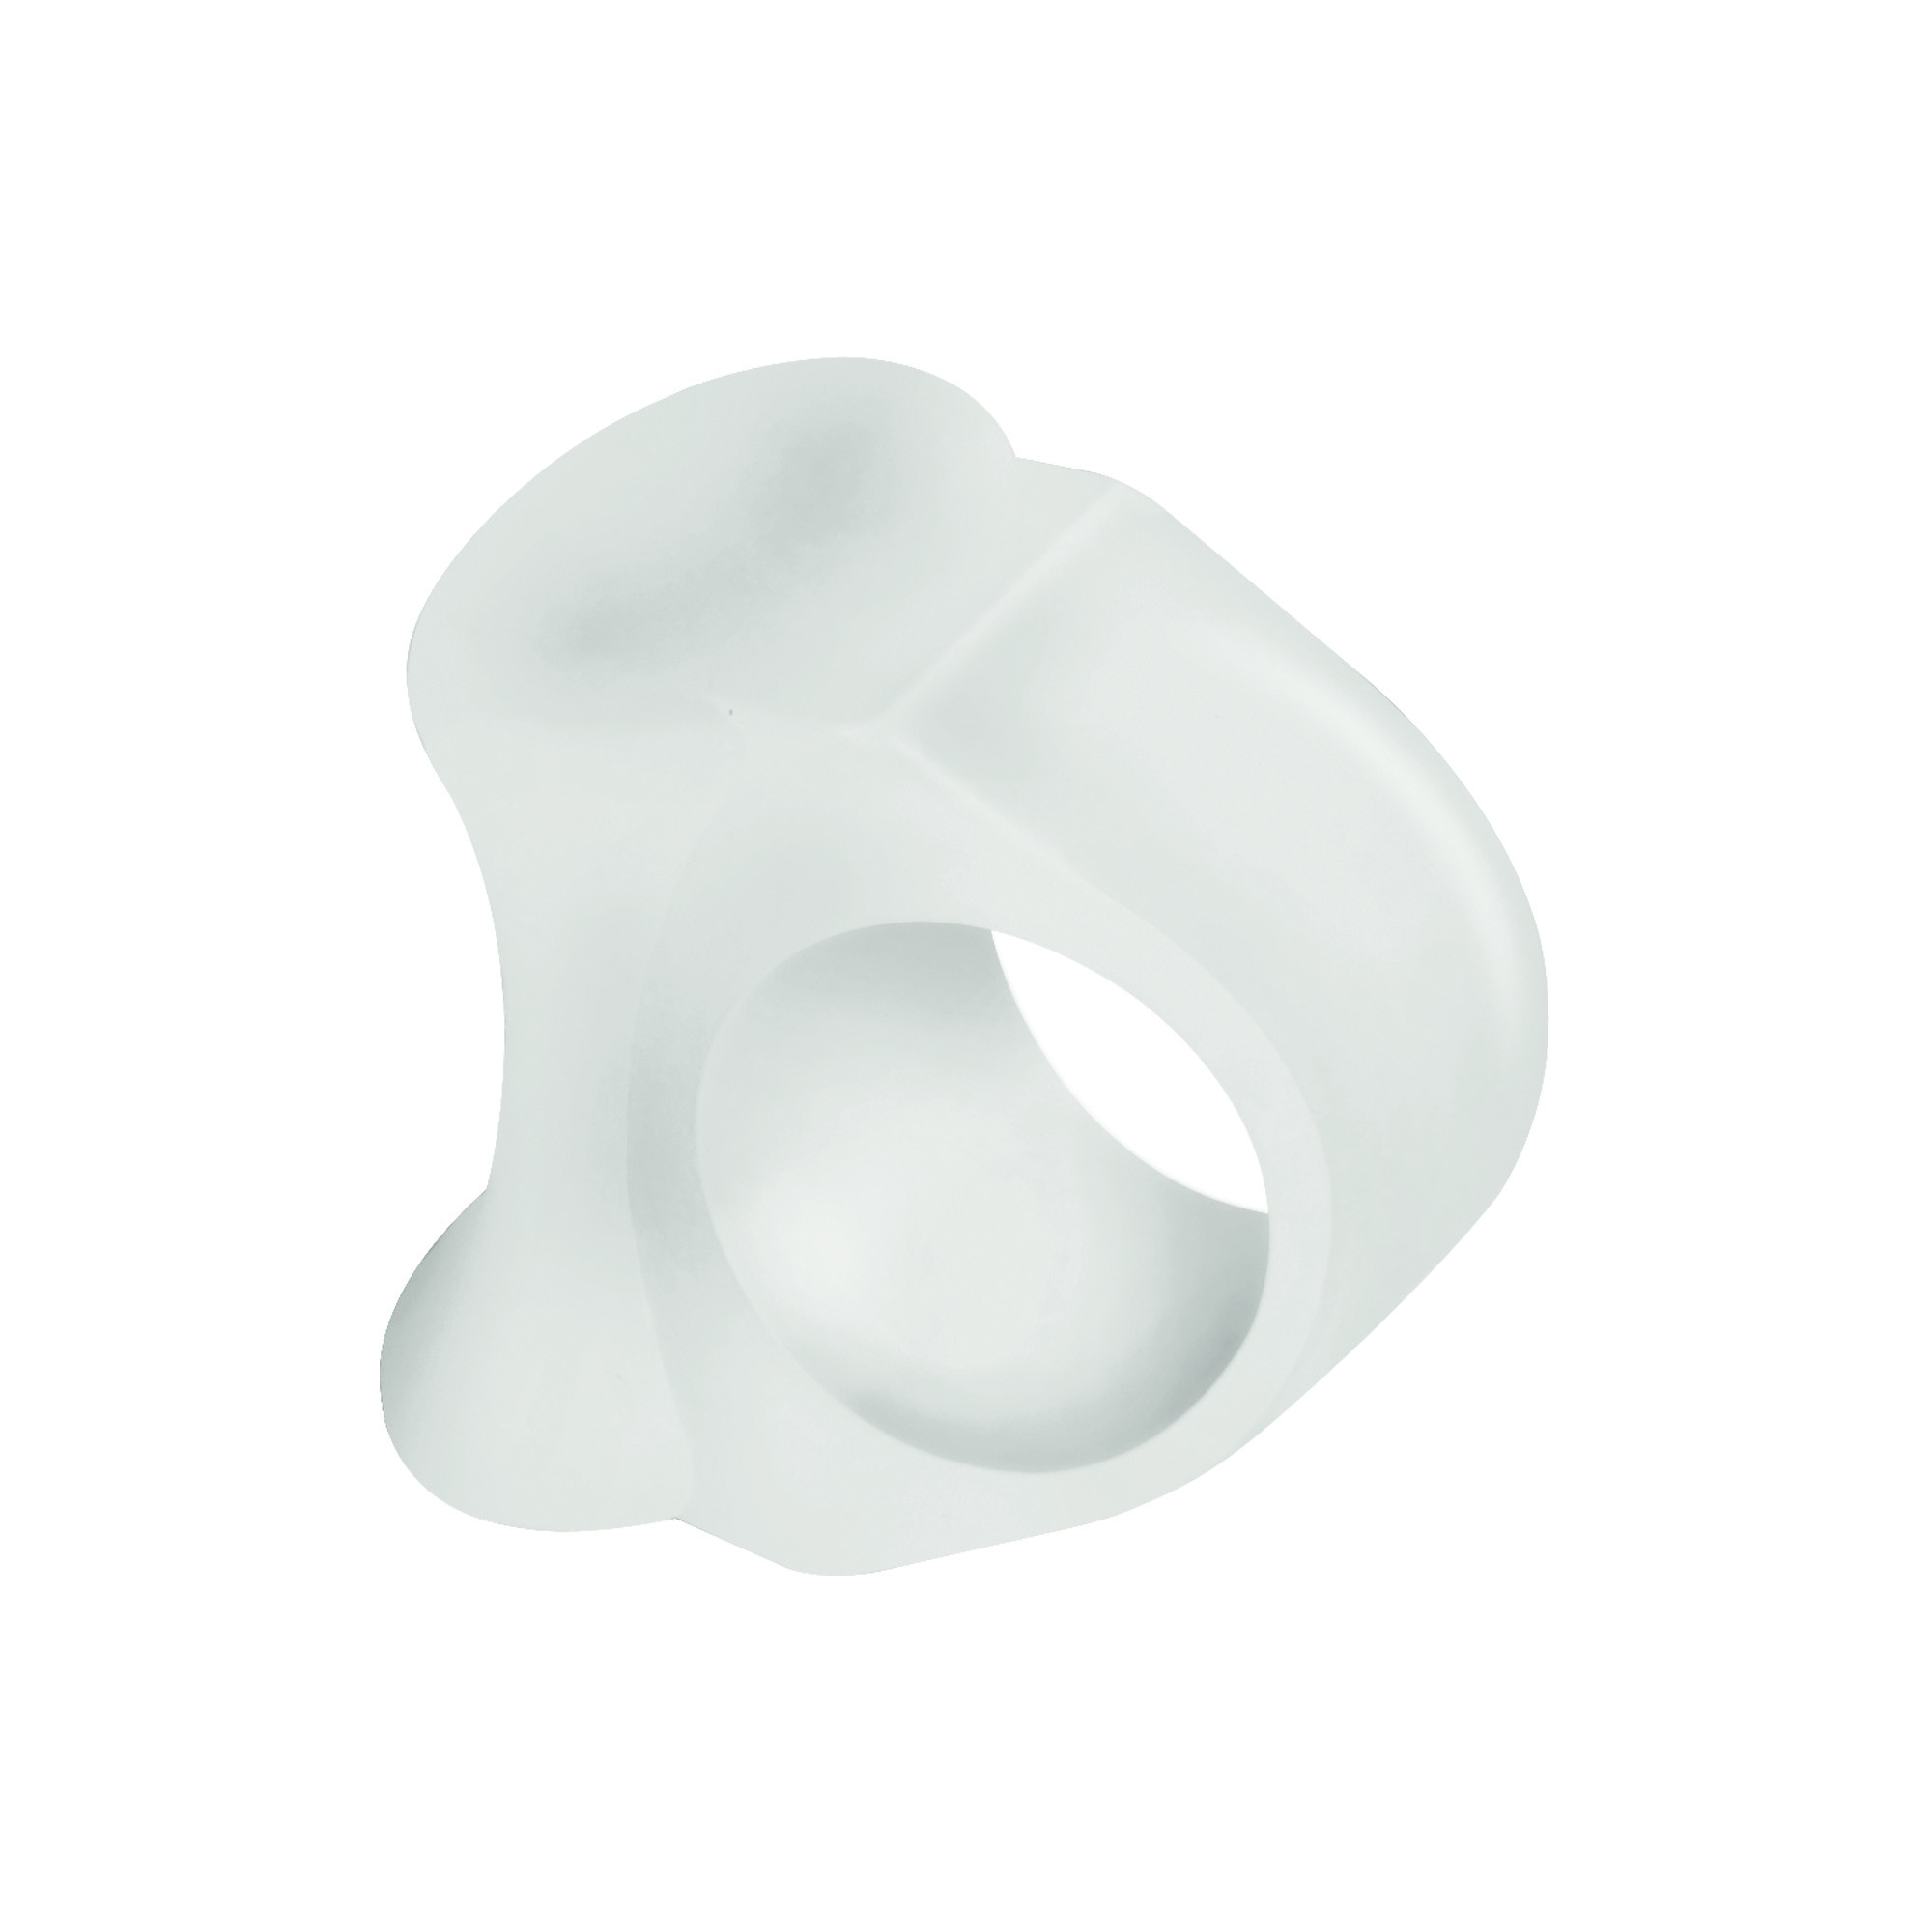 Alluxcare big toe separator and gel ring 1 pc